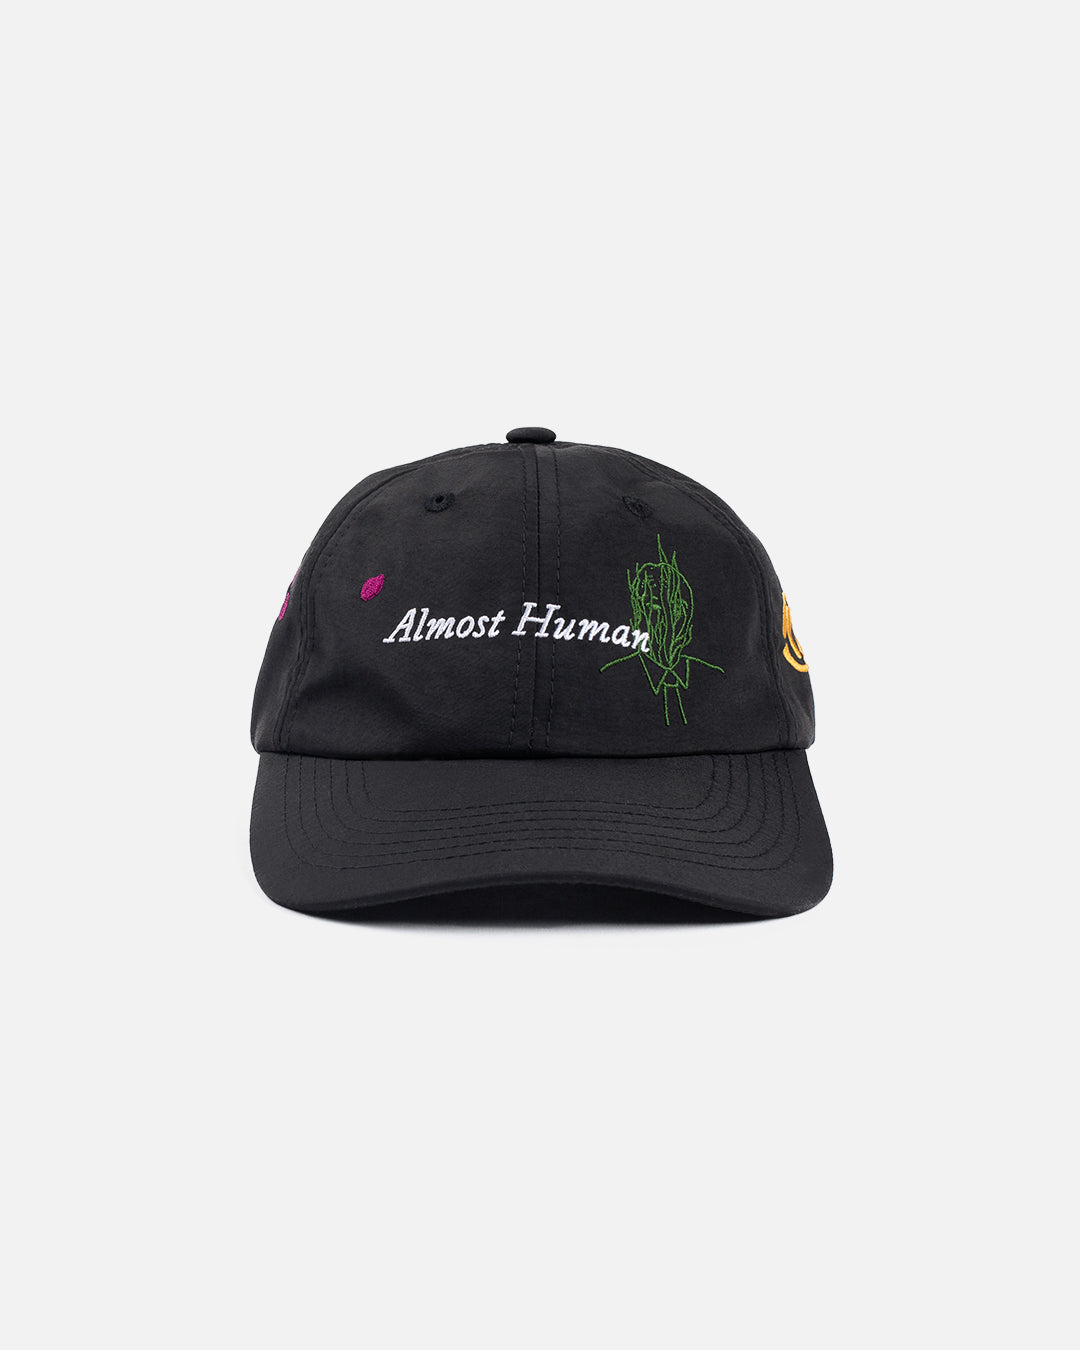 Almost Human Hat